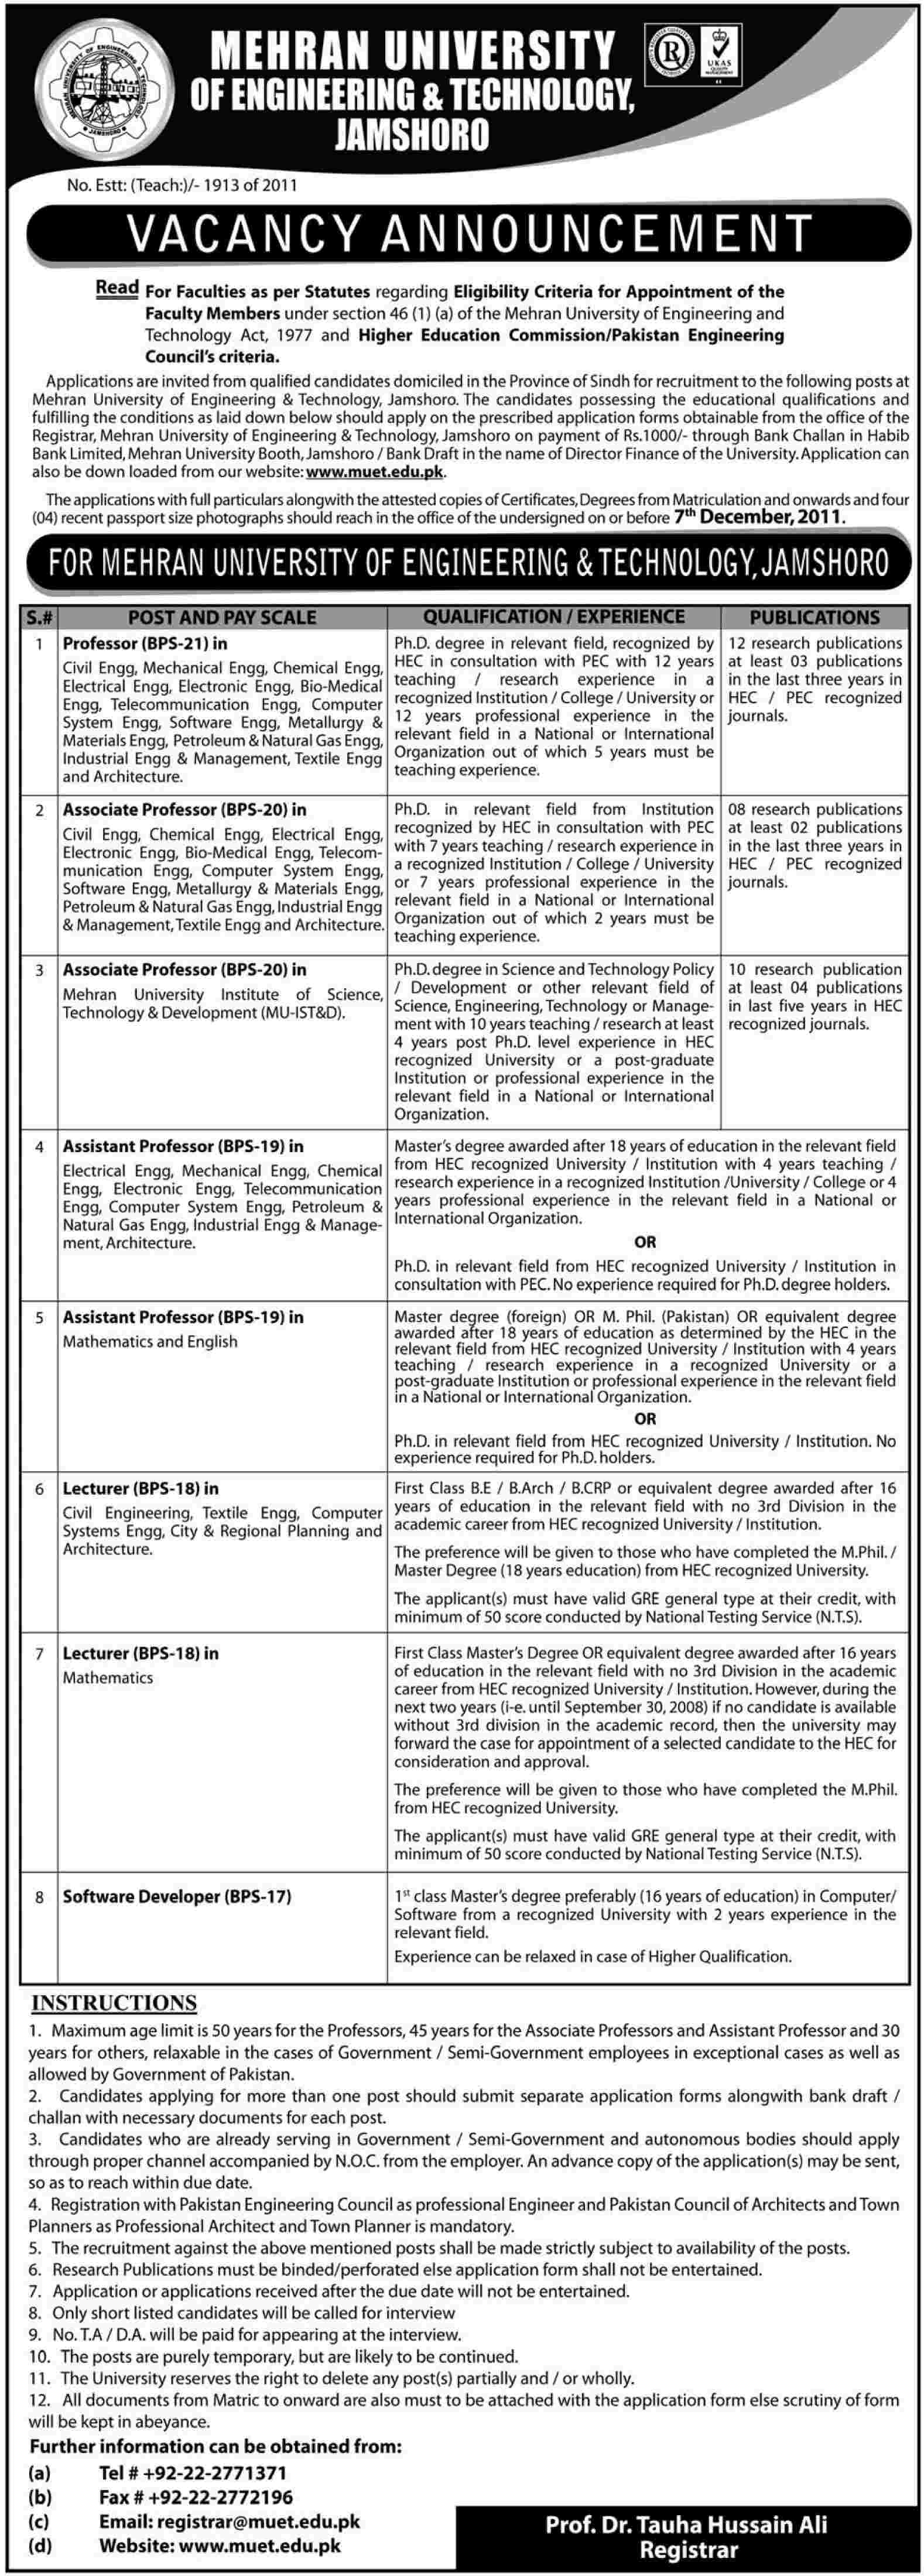 Mehran University of Engineering & Technology Jamshoro Required Faculty for Various Departments